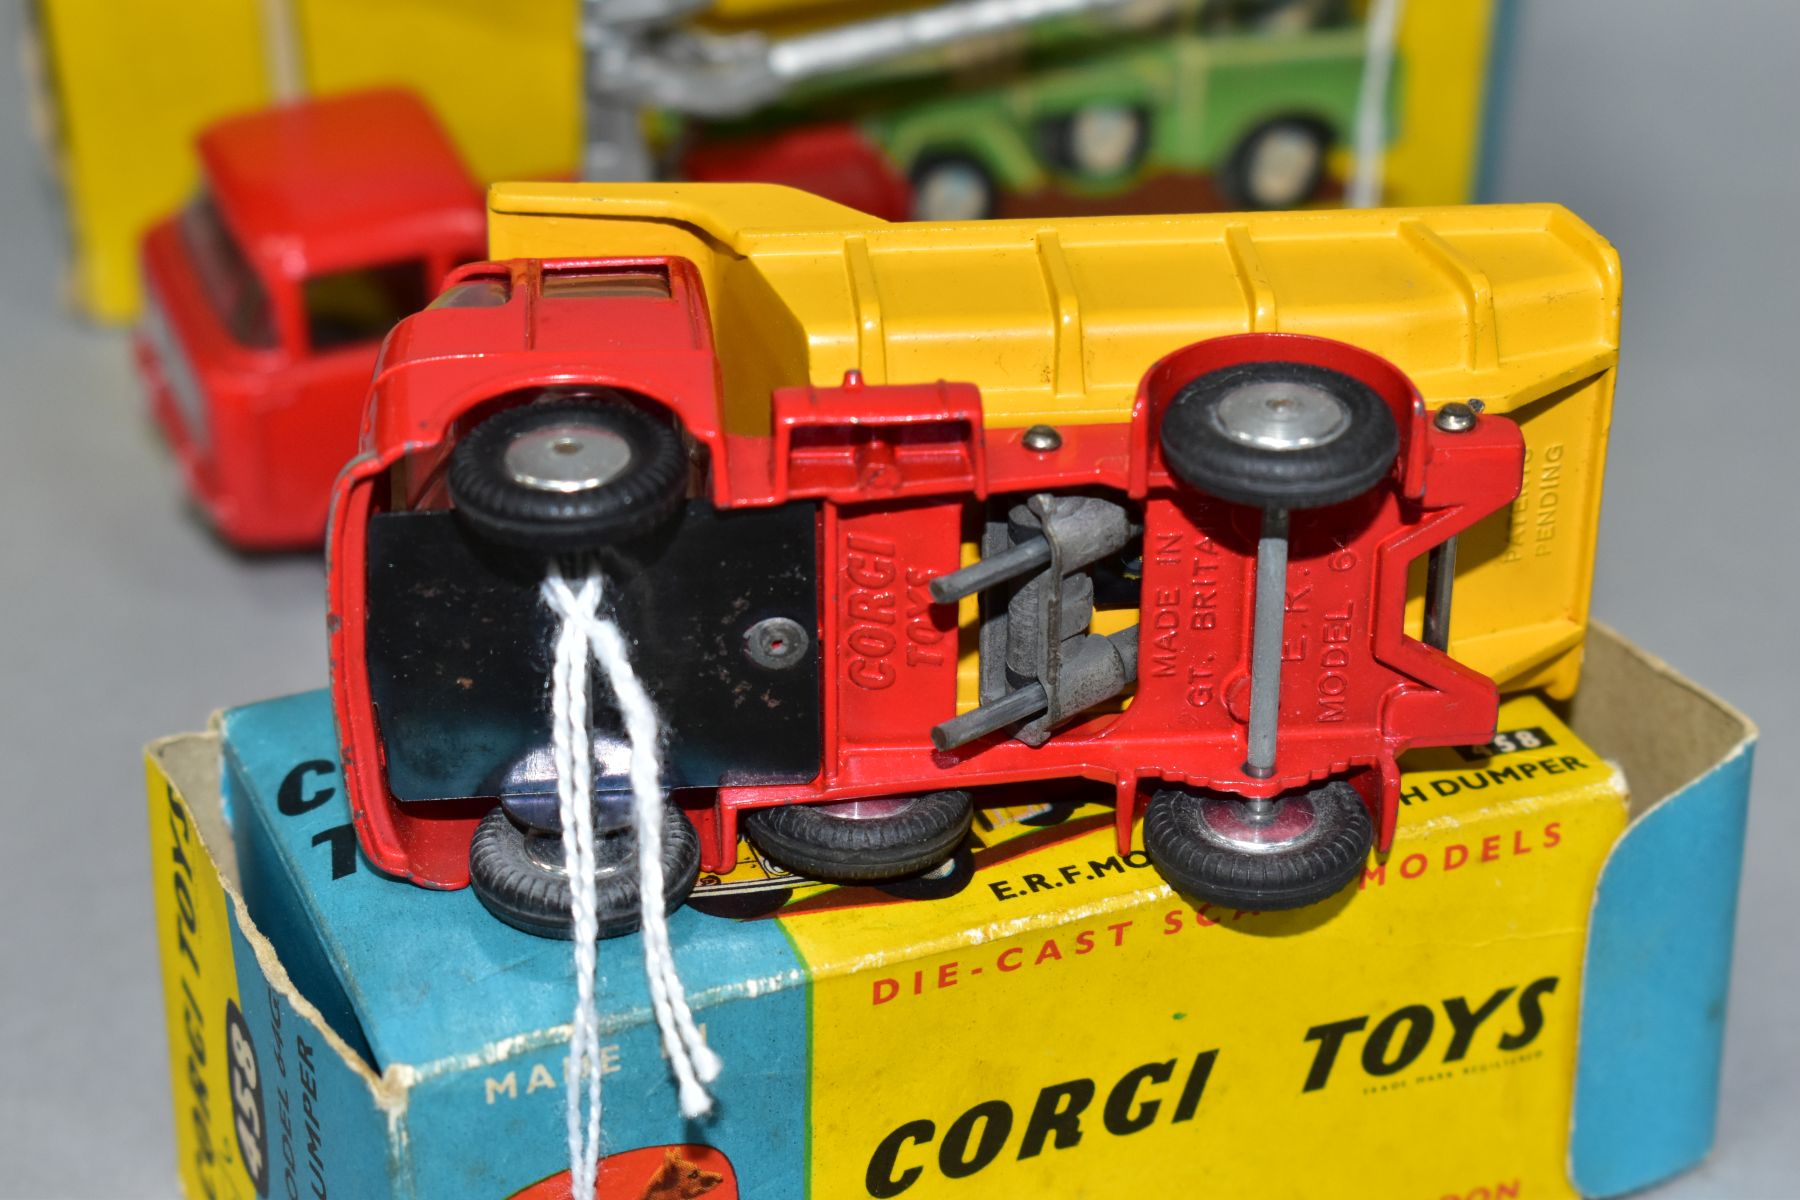 A BOXED CORGI TOYS GIFT SET, No 14, contains FC Jeep Tower Wagon, No 409 but is missing lamp - Image 5 of 11